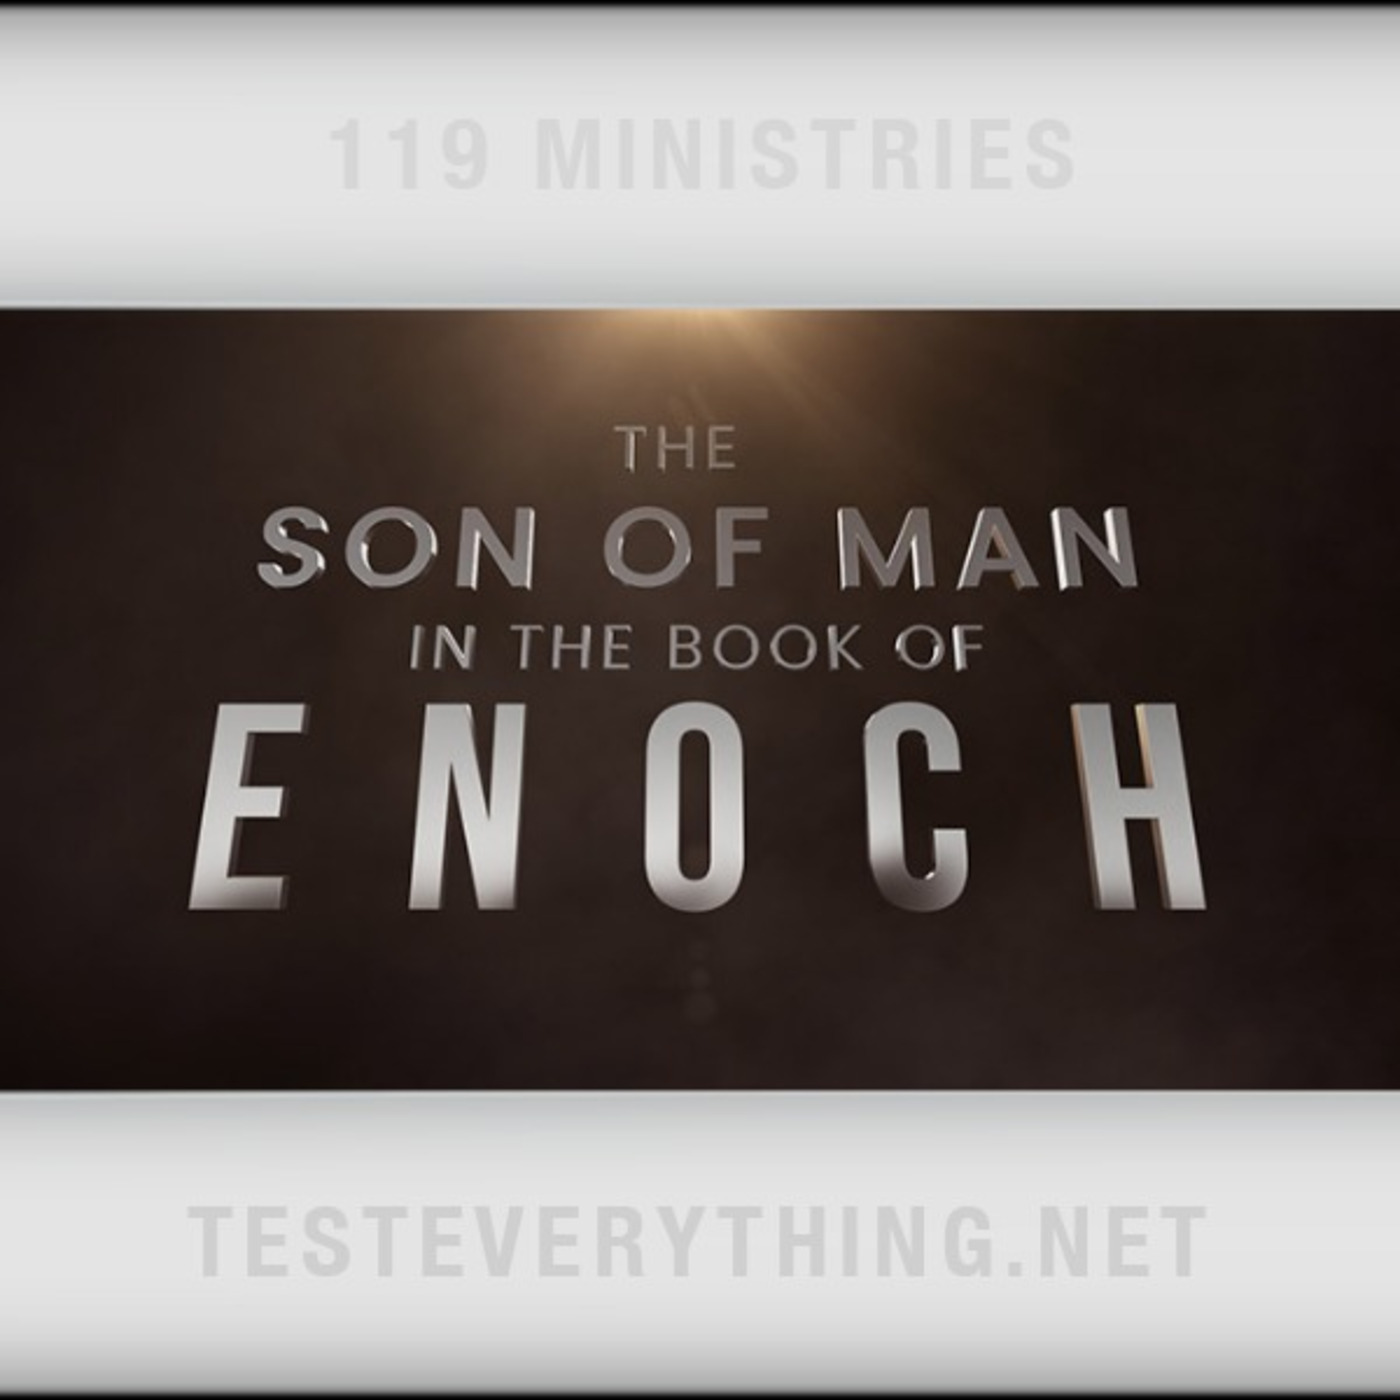 TE: The Son of Man in the Book of Enoch